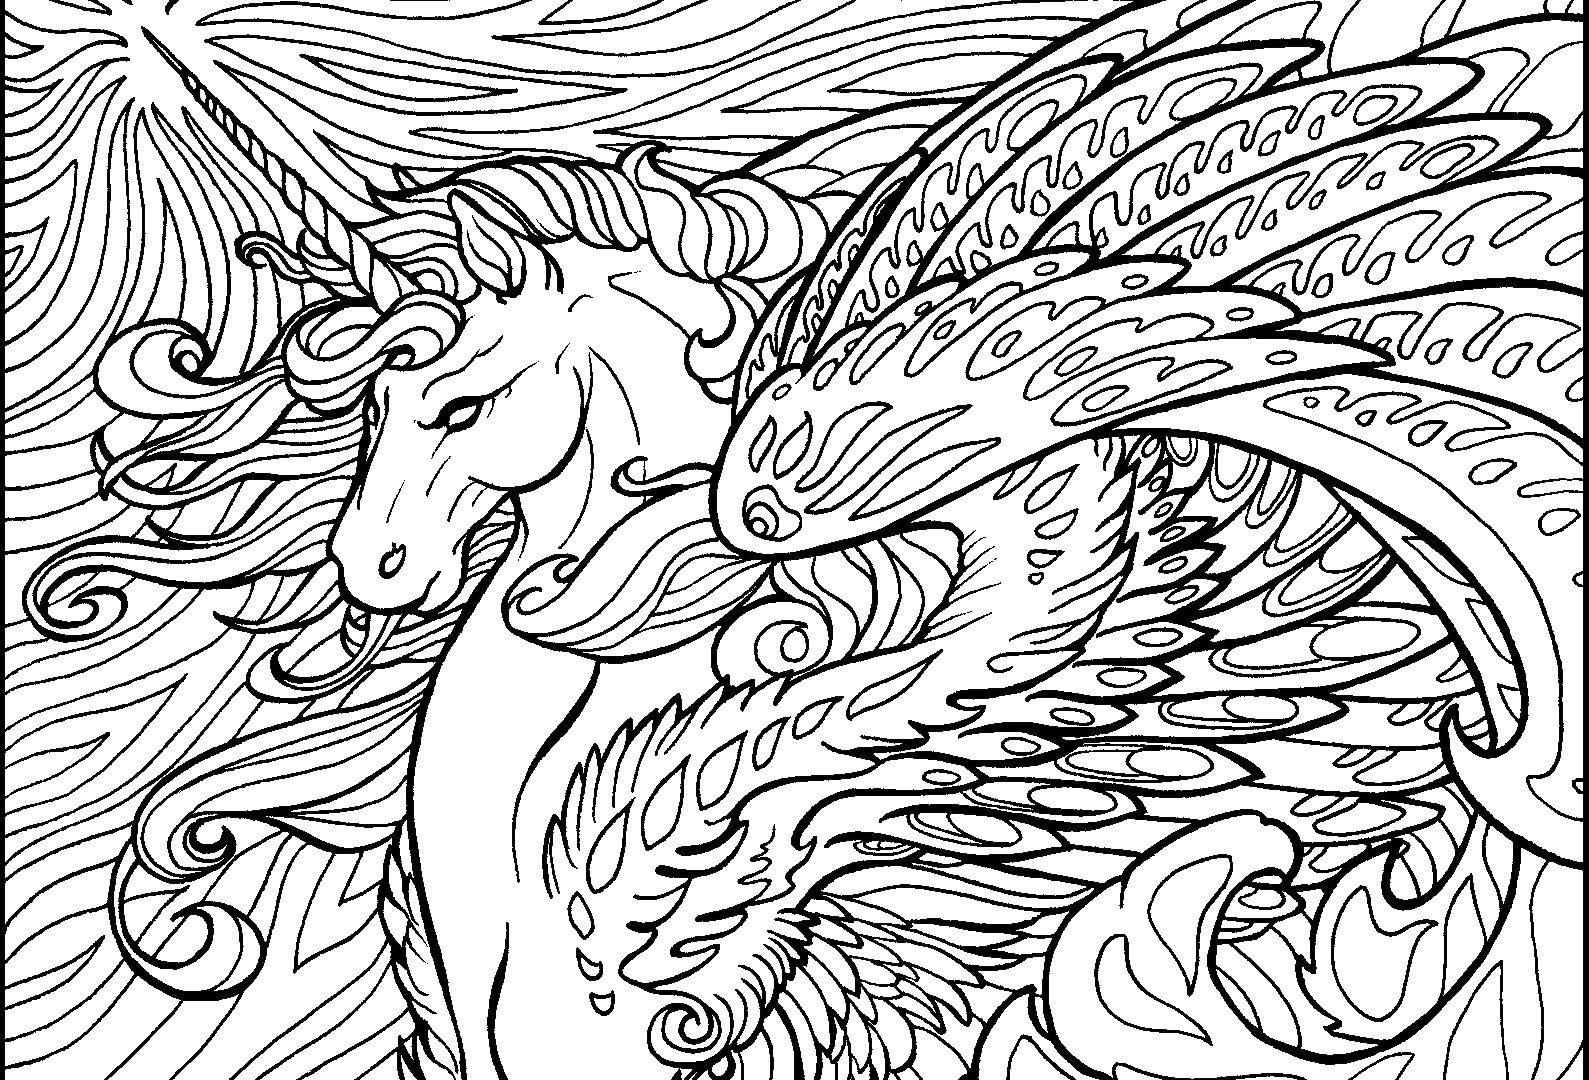 Coloring Pages : Awesome Of Difficult Coloring Pages Animals ...